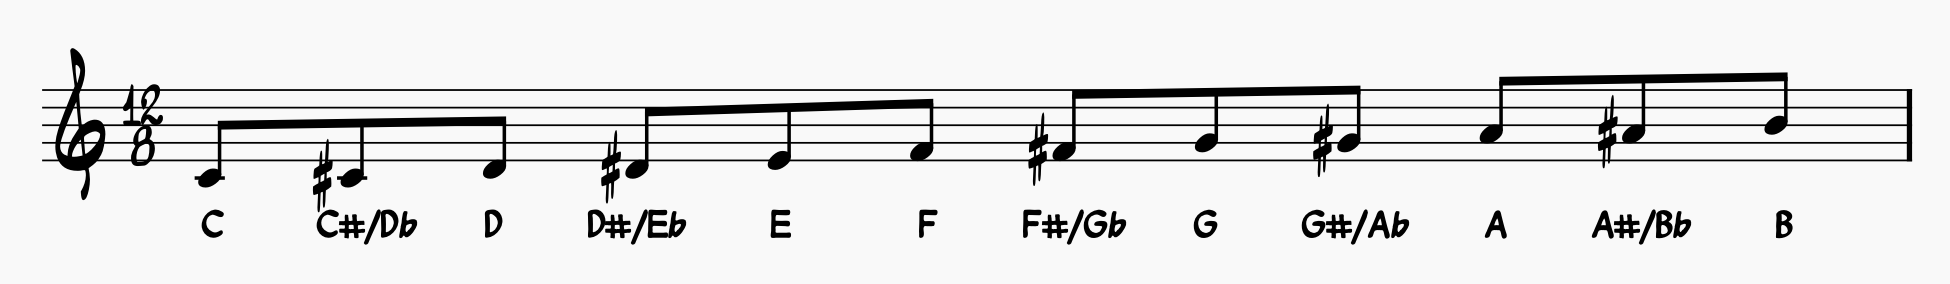 Chromatic Scale notated with enharmonic notes